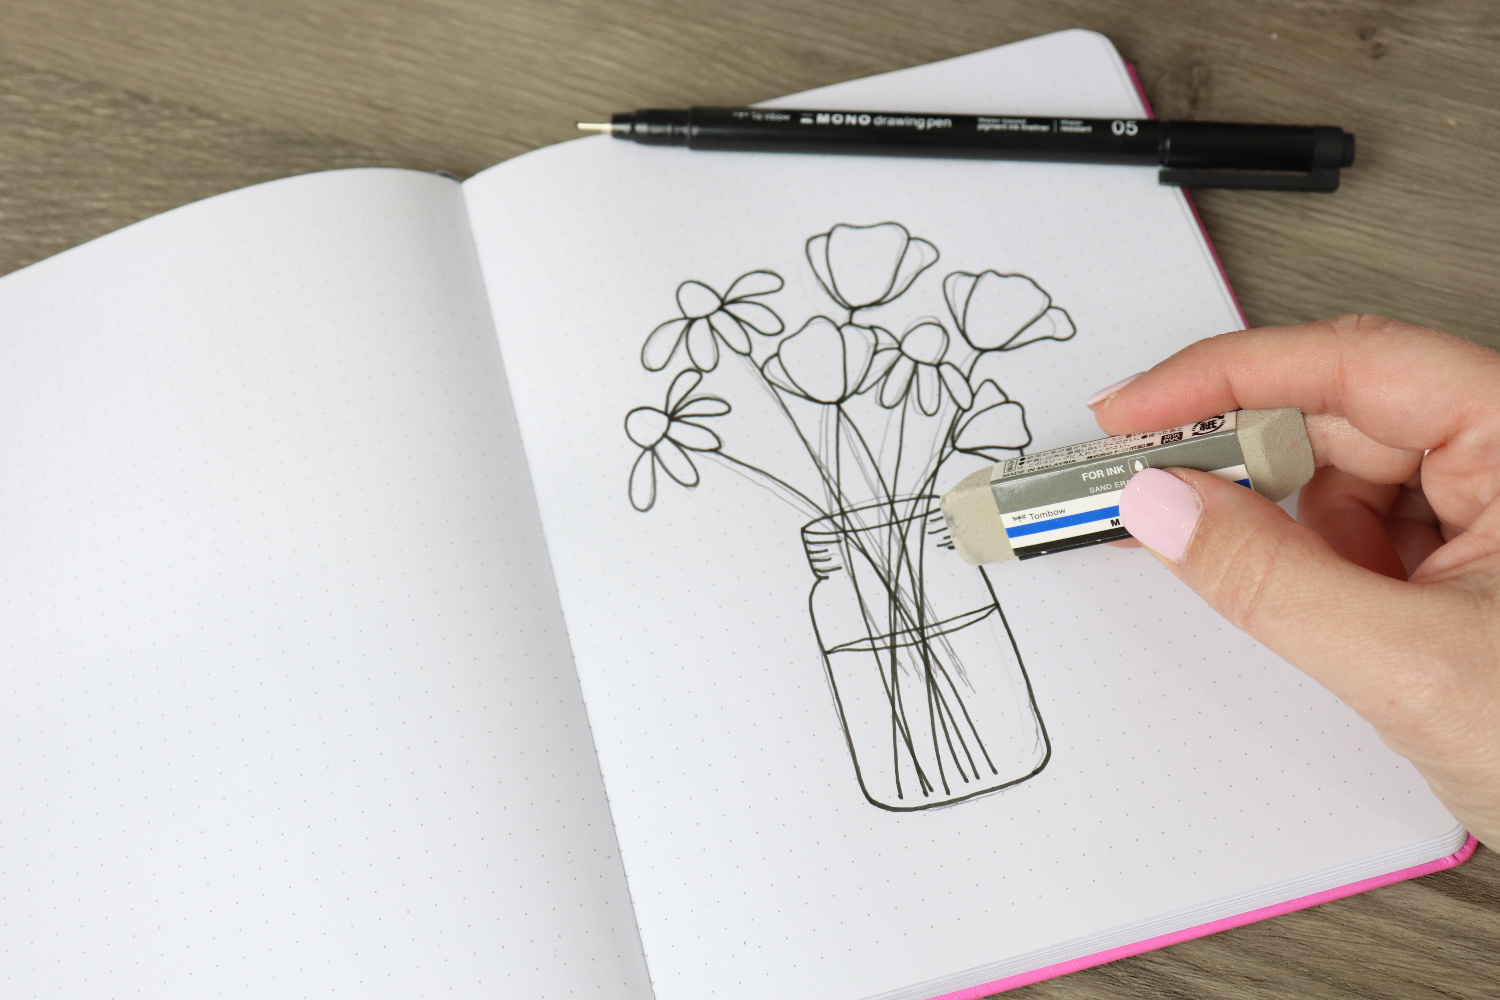 Image contains an open sketchbook with a bouquet of flowers drawn in black ink. Amy’s hand holds a MONO Sand Eraser prepared to erase any visible pencil lines. A MONO Drawing Pen 05 sits on top of the page.